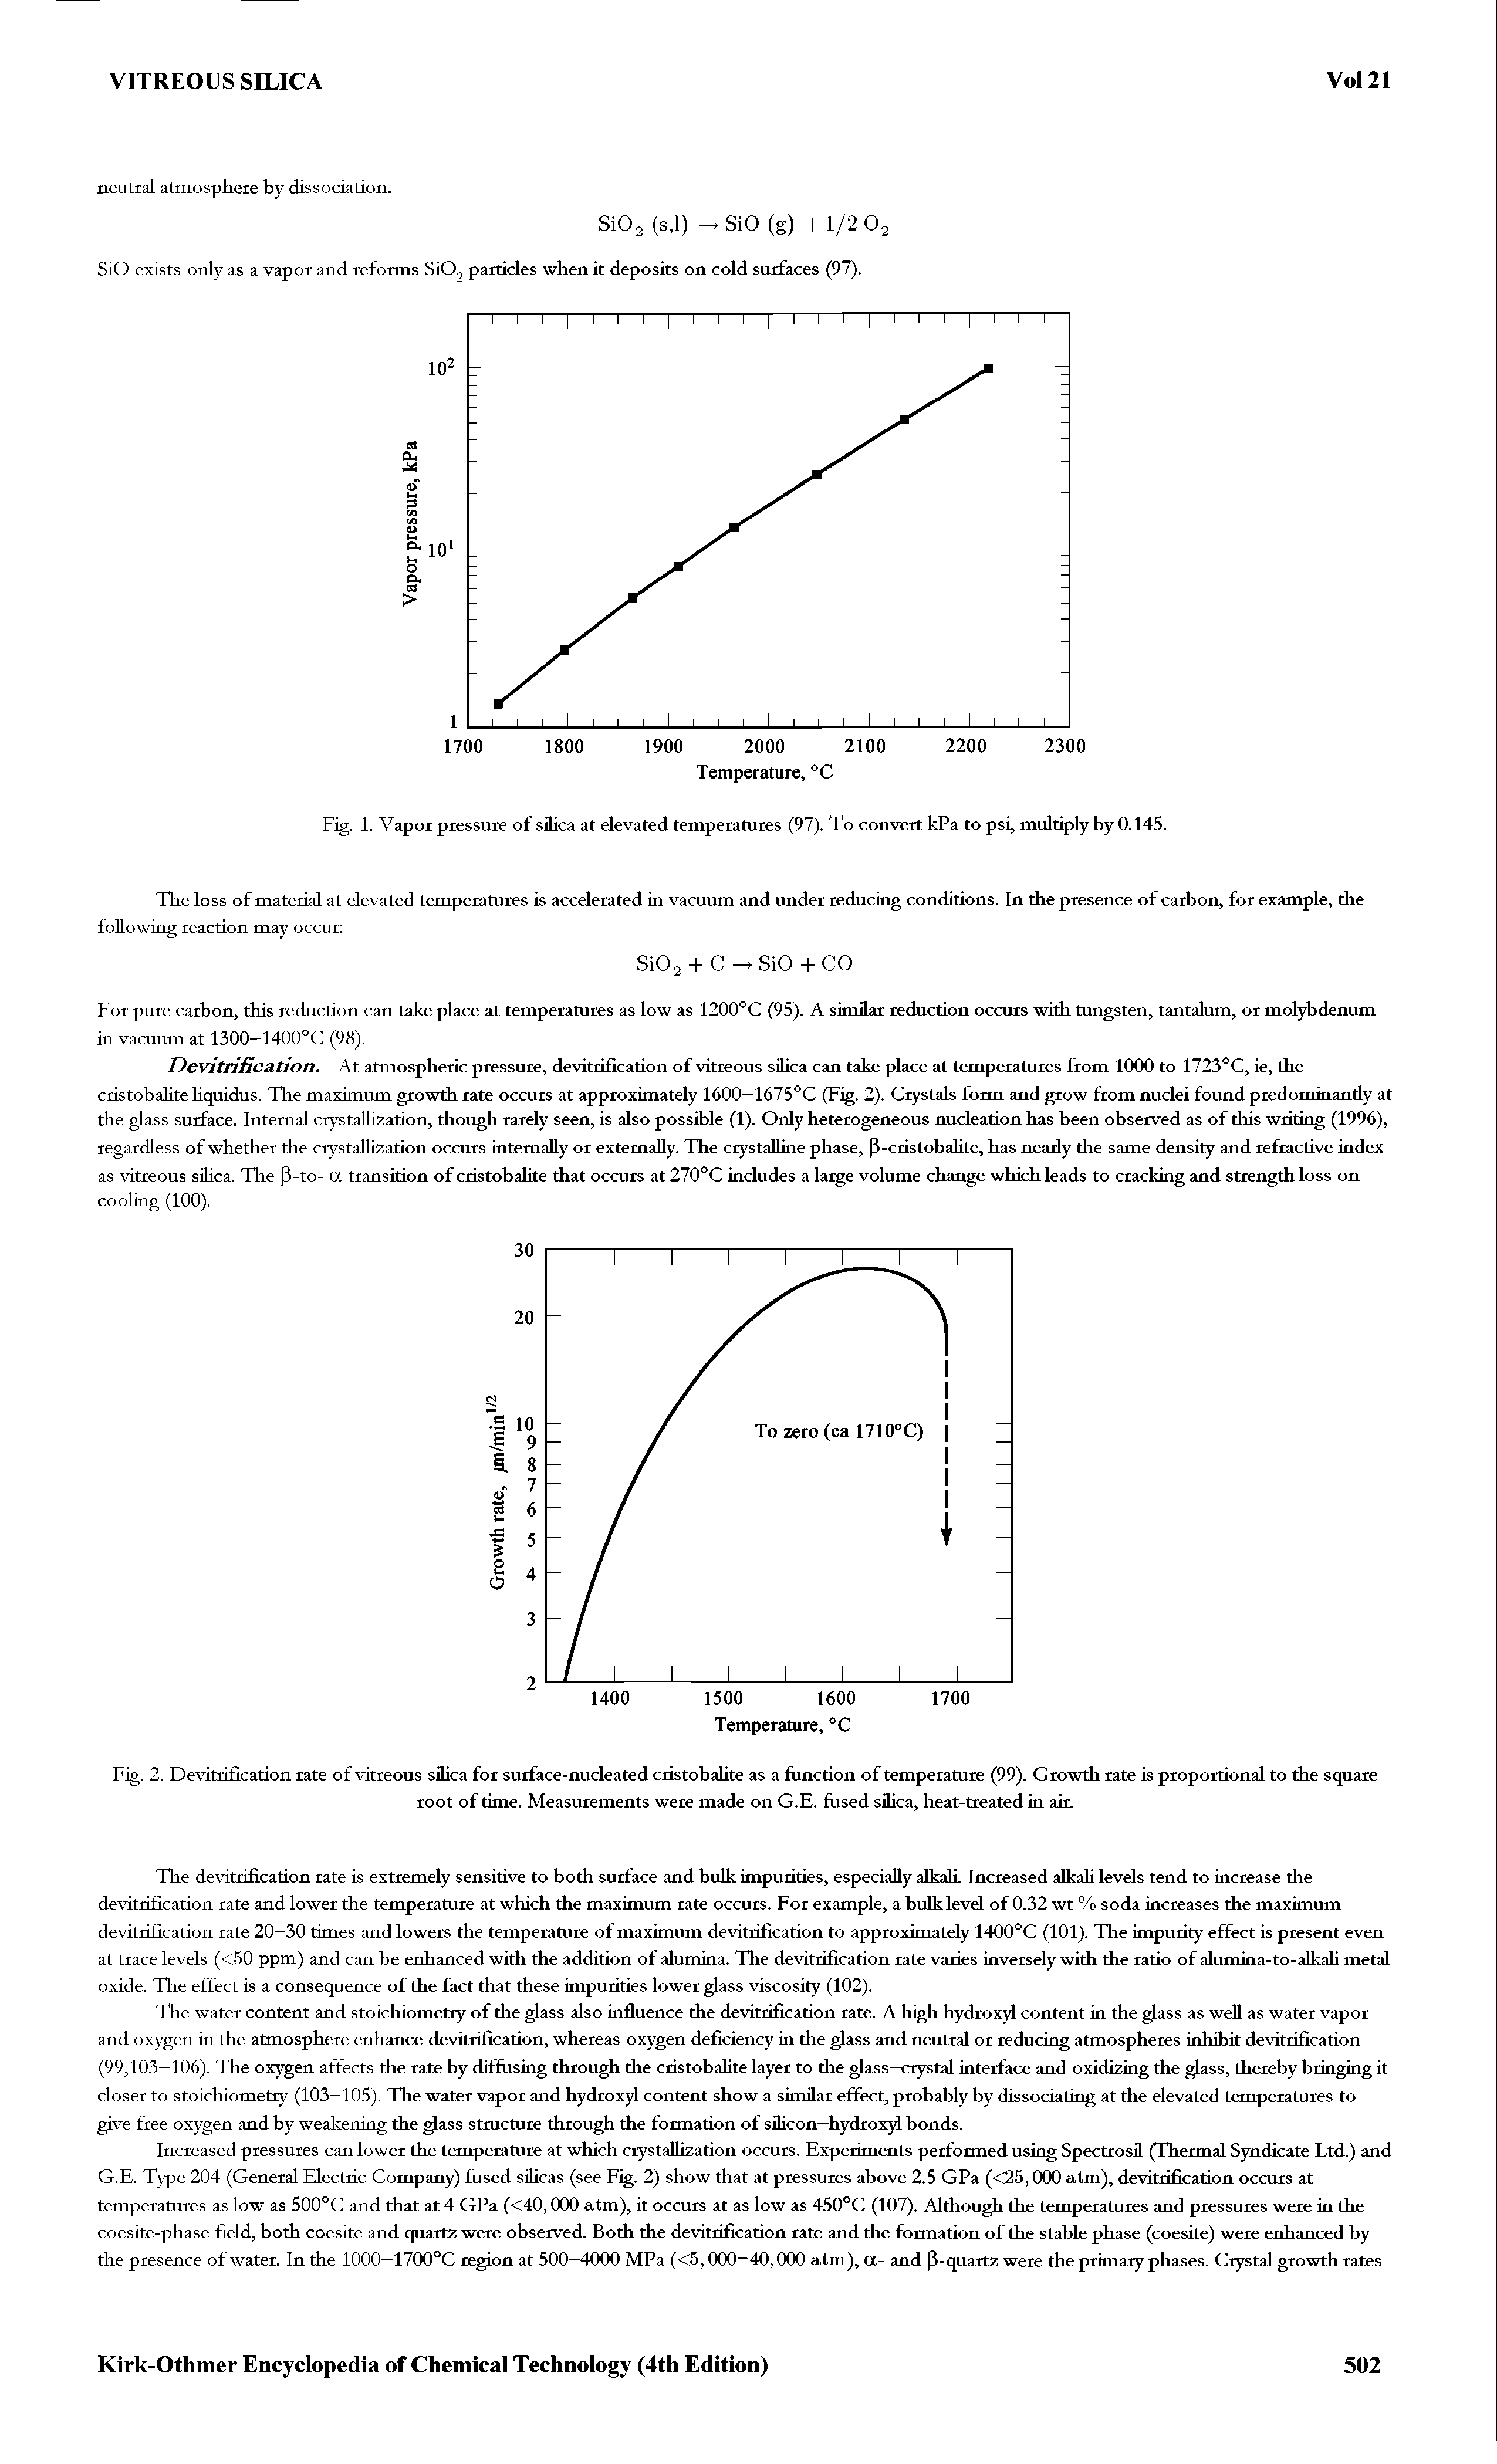 Fig. 2. Devitrification rate of vitreous silica for surface-nucleated cristobalite as a function of temperature (99). Growth rate is proportional to the square...